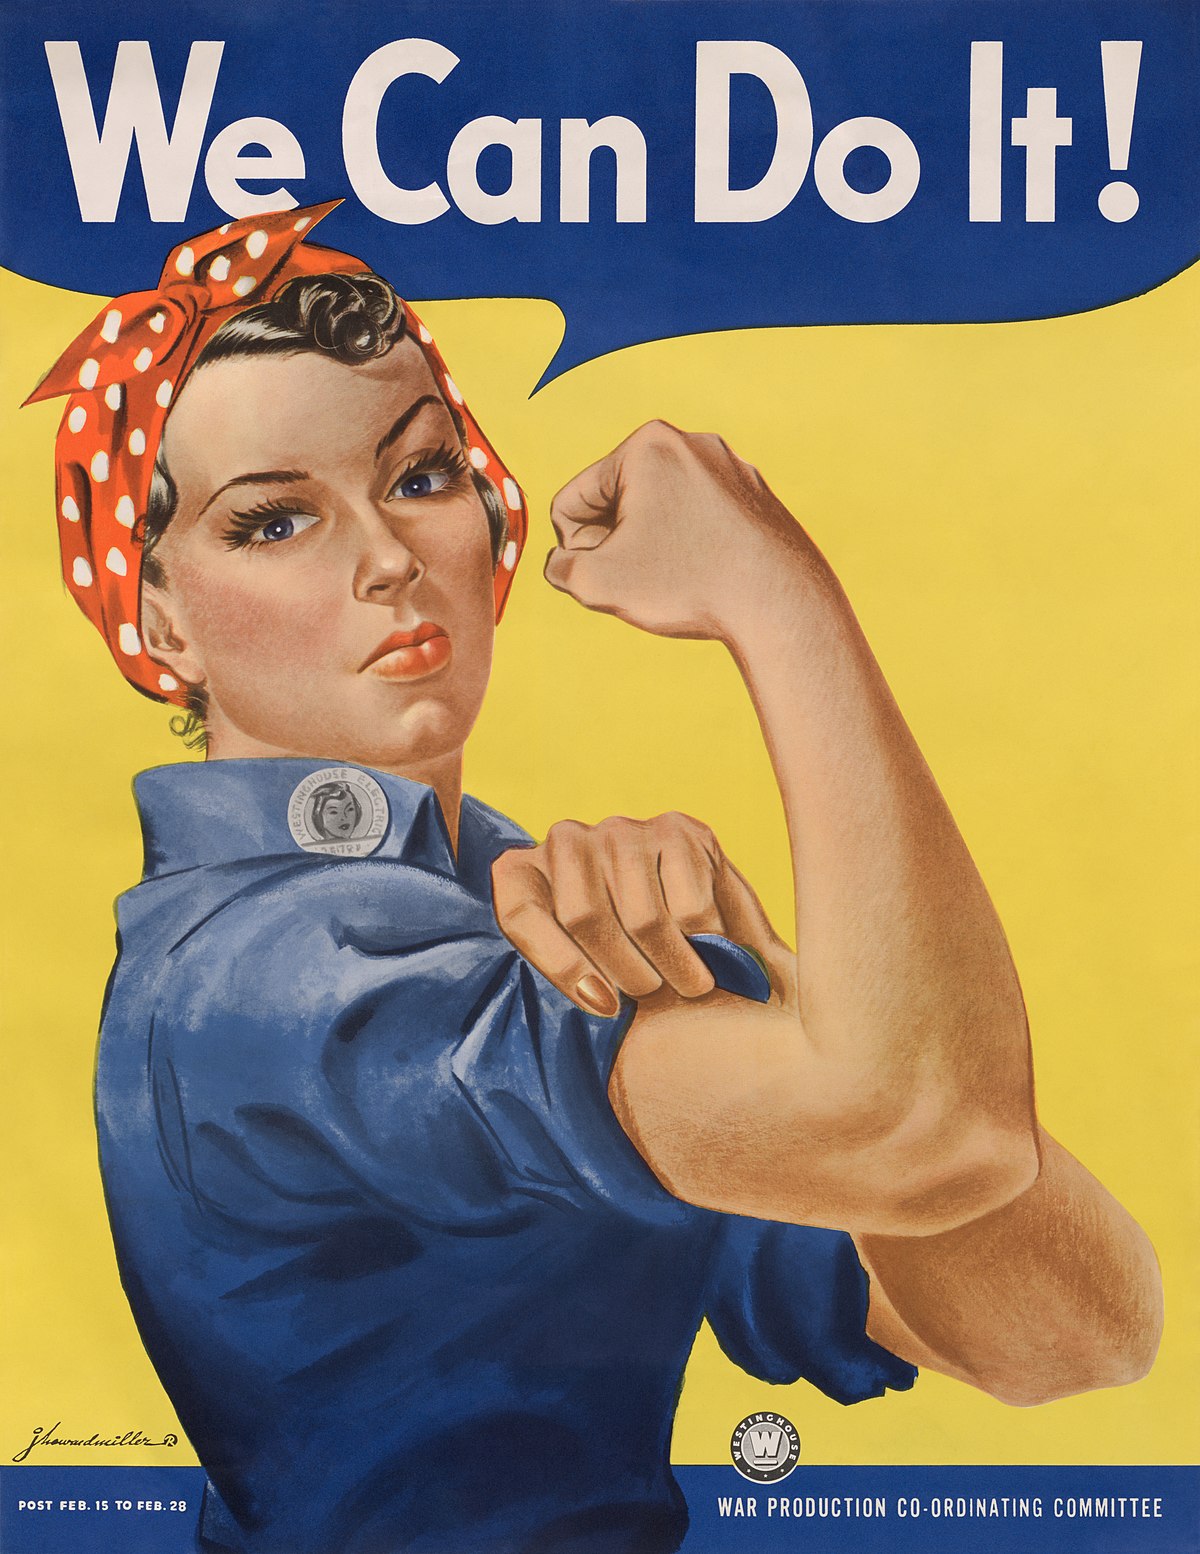 We Can Do It! WW2 World war 2 poster encouraging women to be strong like men because of feminist feminism movement telling women to work and abandon traditional gender roles